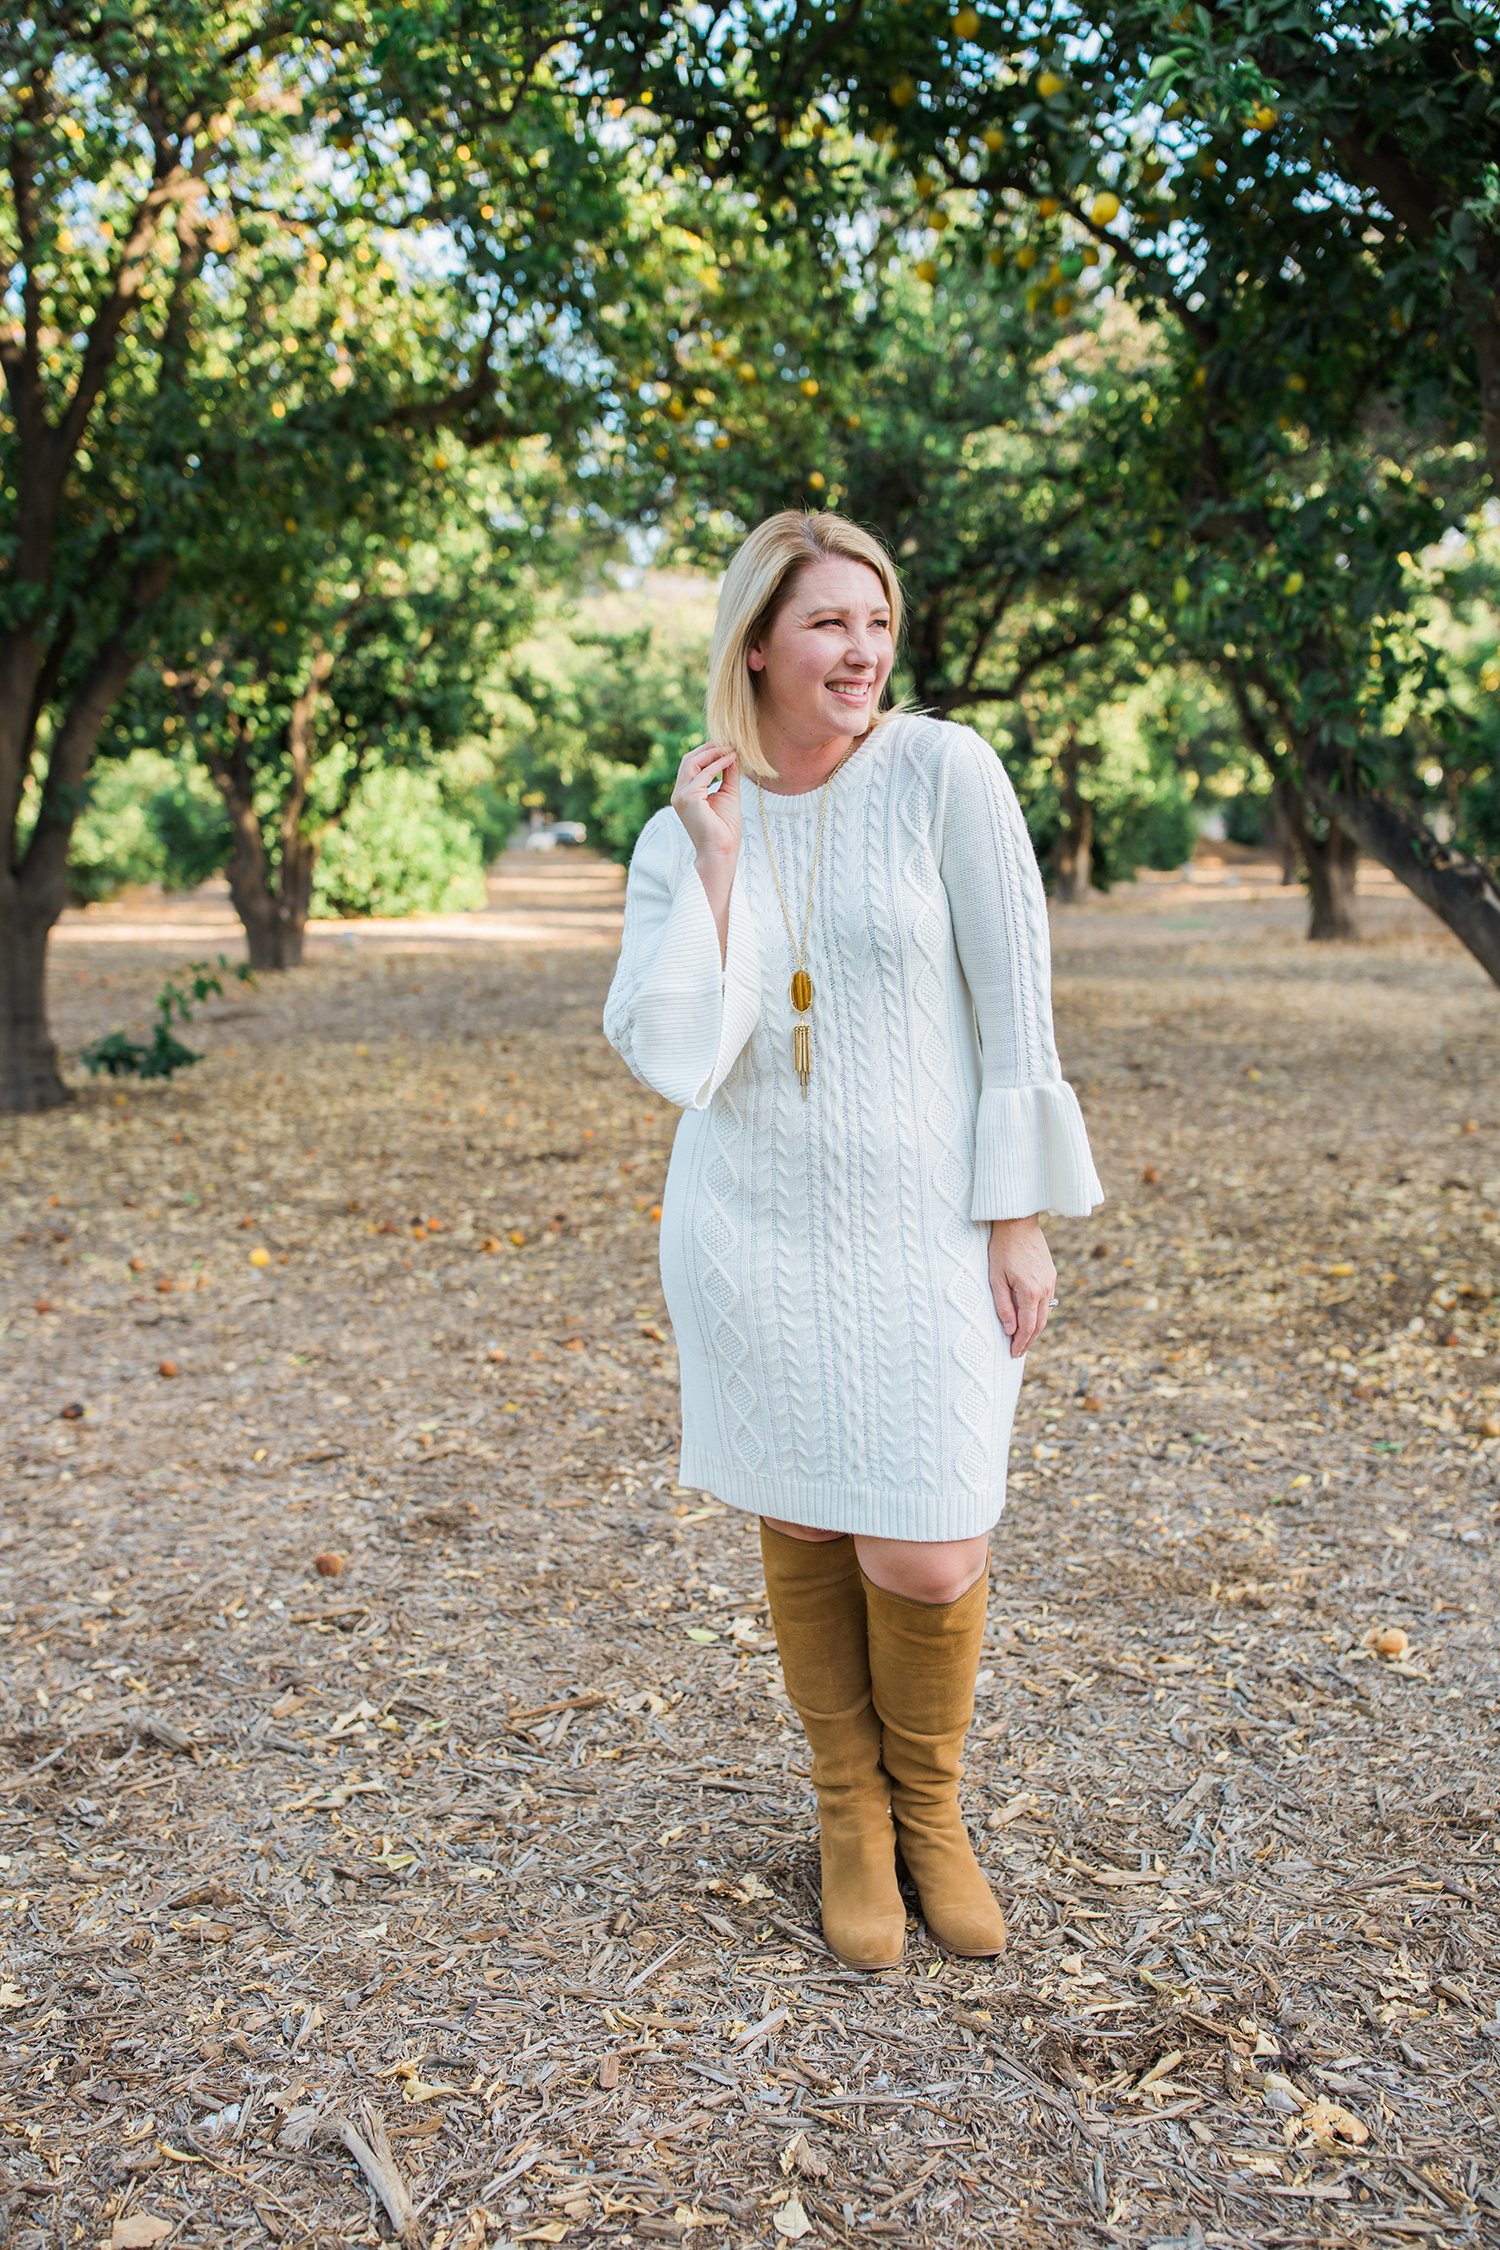 On the hunt for holiday dresses? This white sweater dress is flattering, comfortable and super versatile!